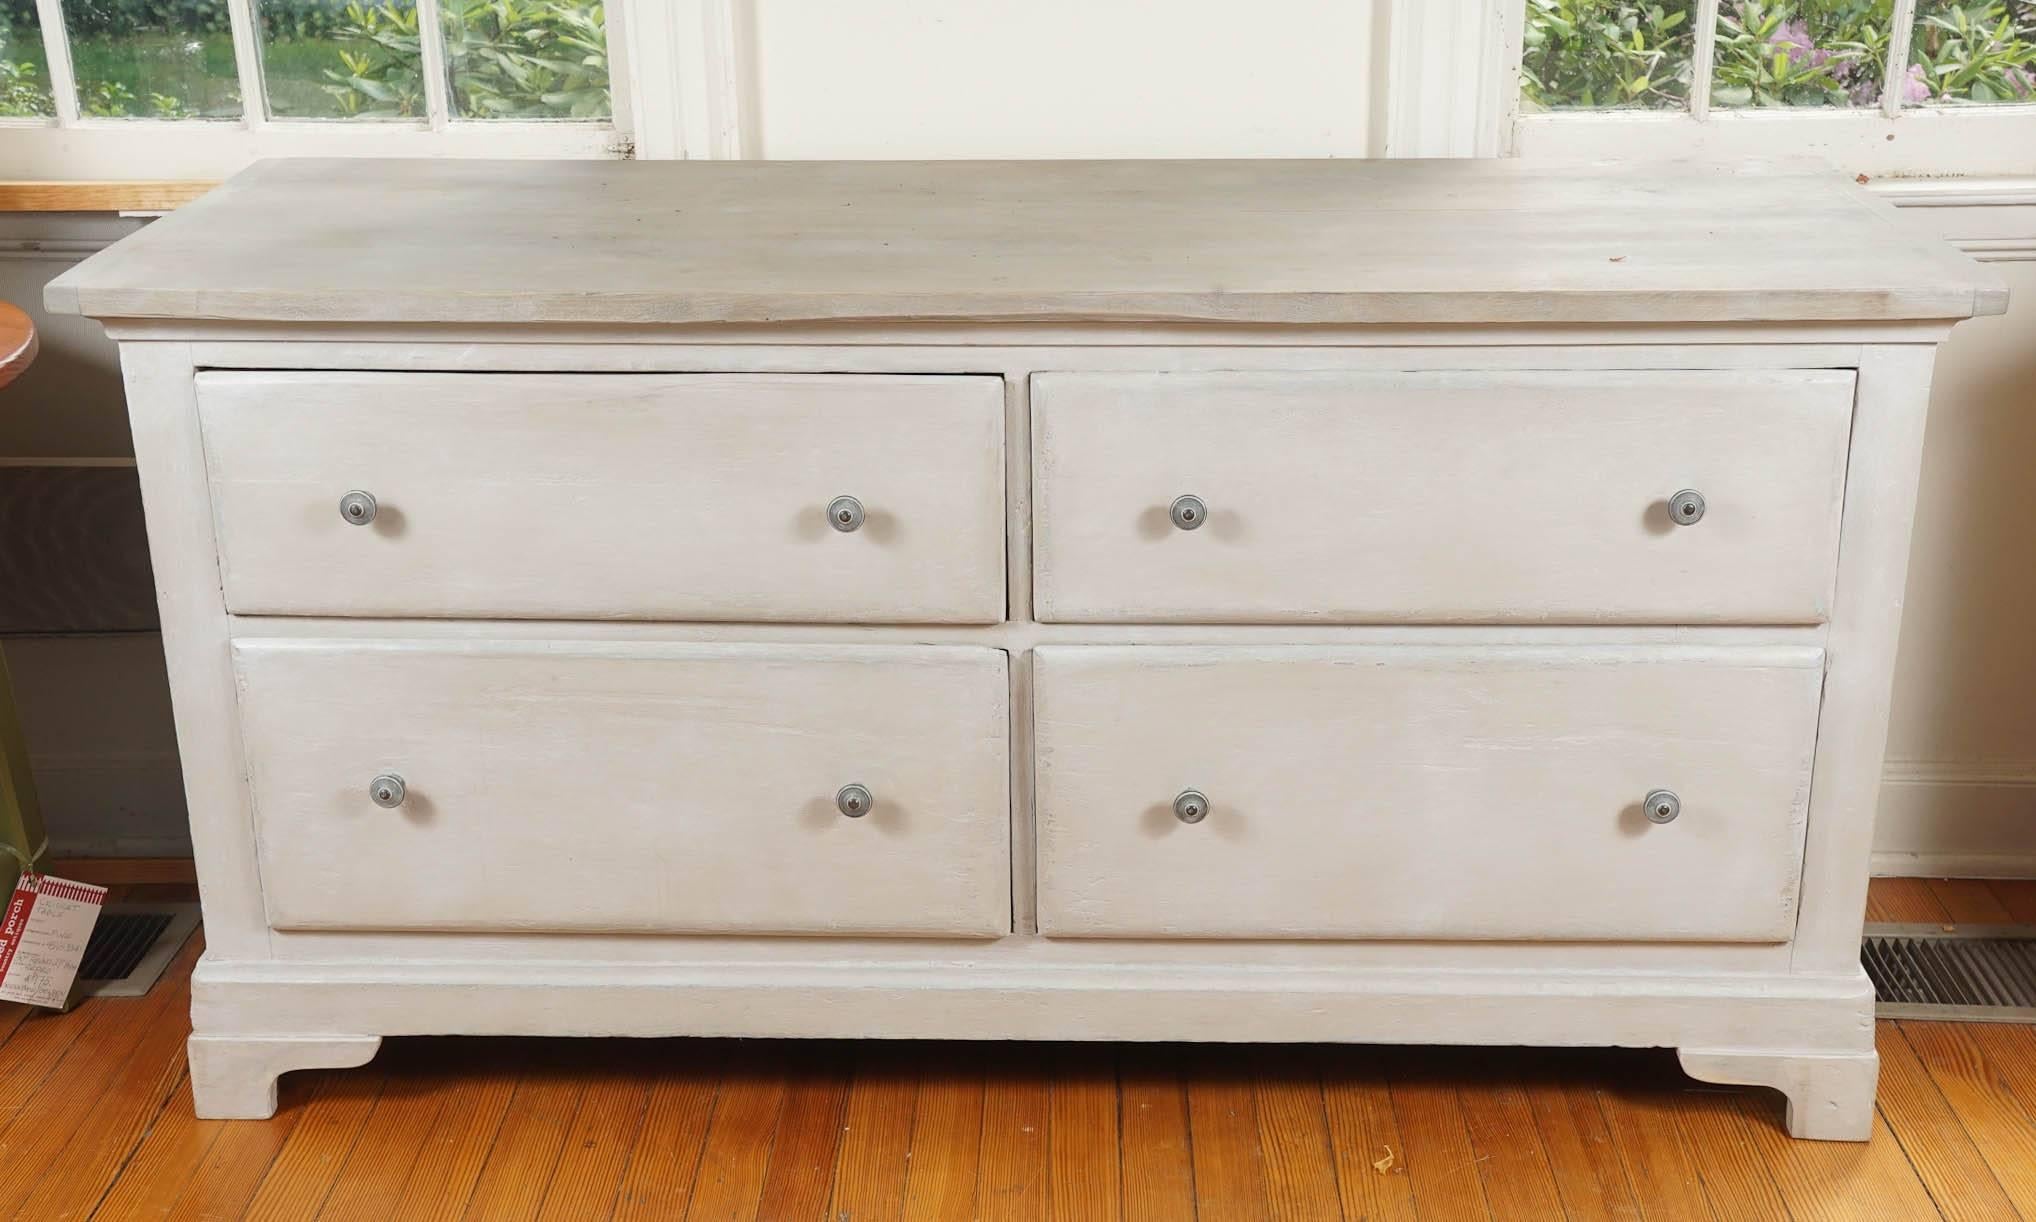 Soft French grey painted base with very pretty darker grey knobs accent this useful dresser, circa 1870. The drawers are spacious and the top is very nice. So are the bracket feet on the bottom. This is a very functional graceful base.